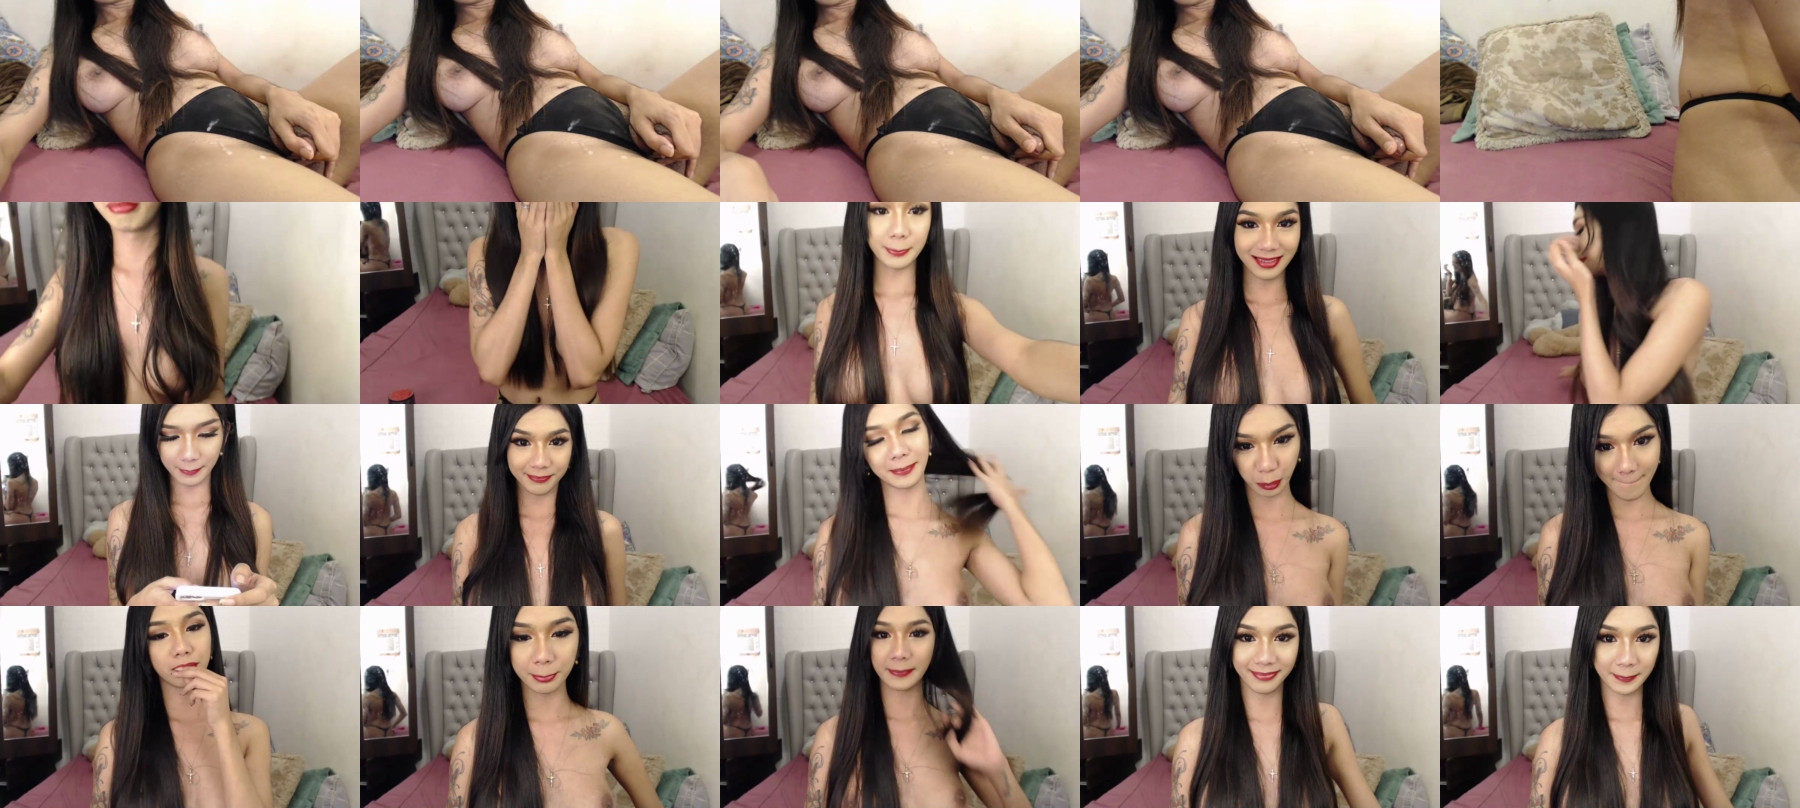 Lily_Cums01 Download CAM SHOW @ Chaturbate 29-04-2021